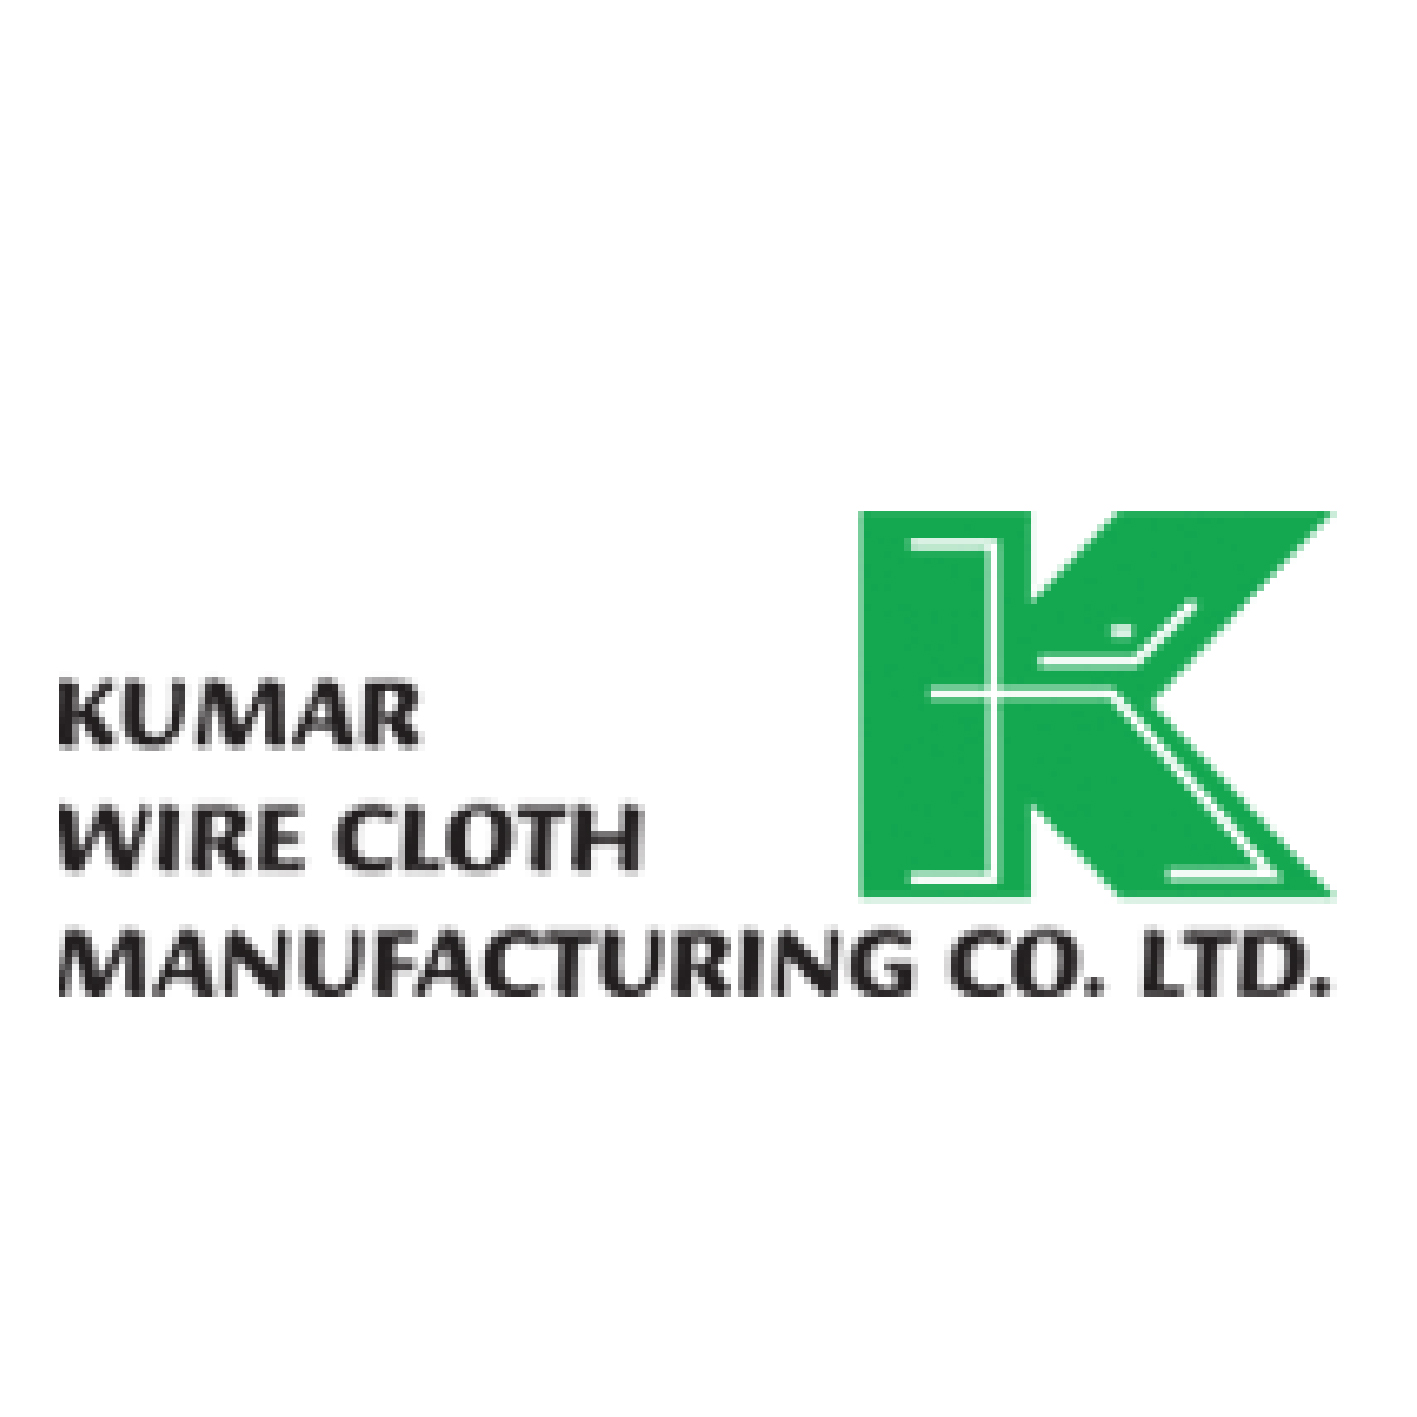 Kumar wire cloth manufacturing - Client